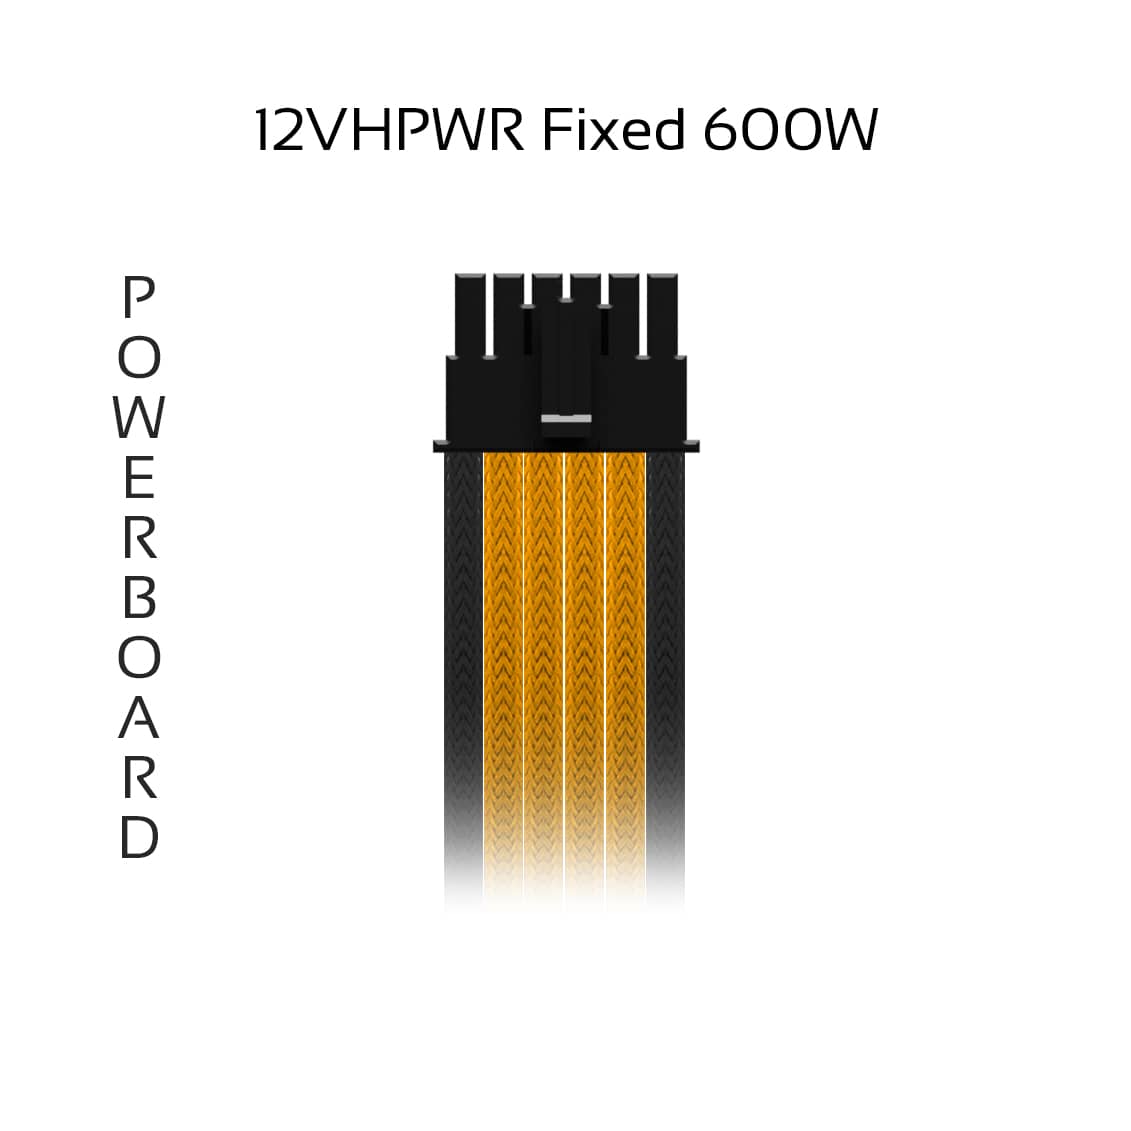 12vhpwr-fixed-powerboard